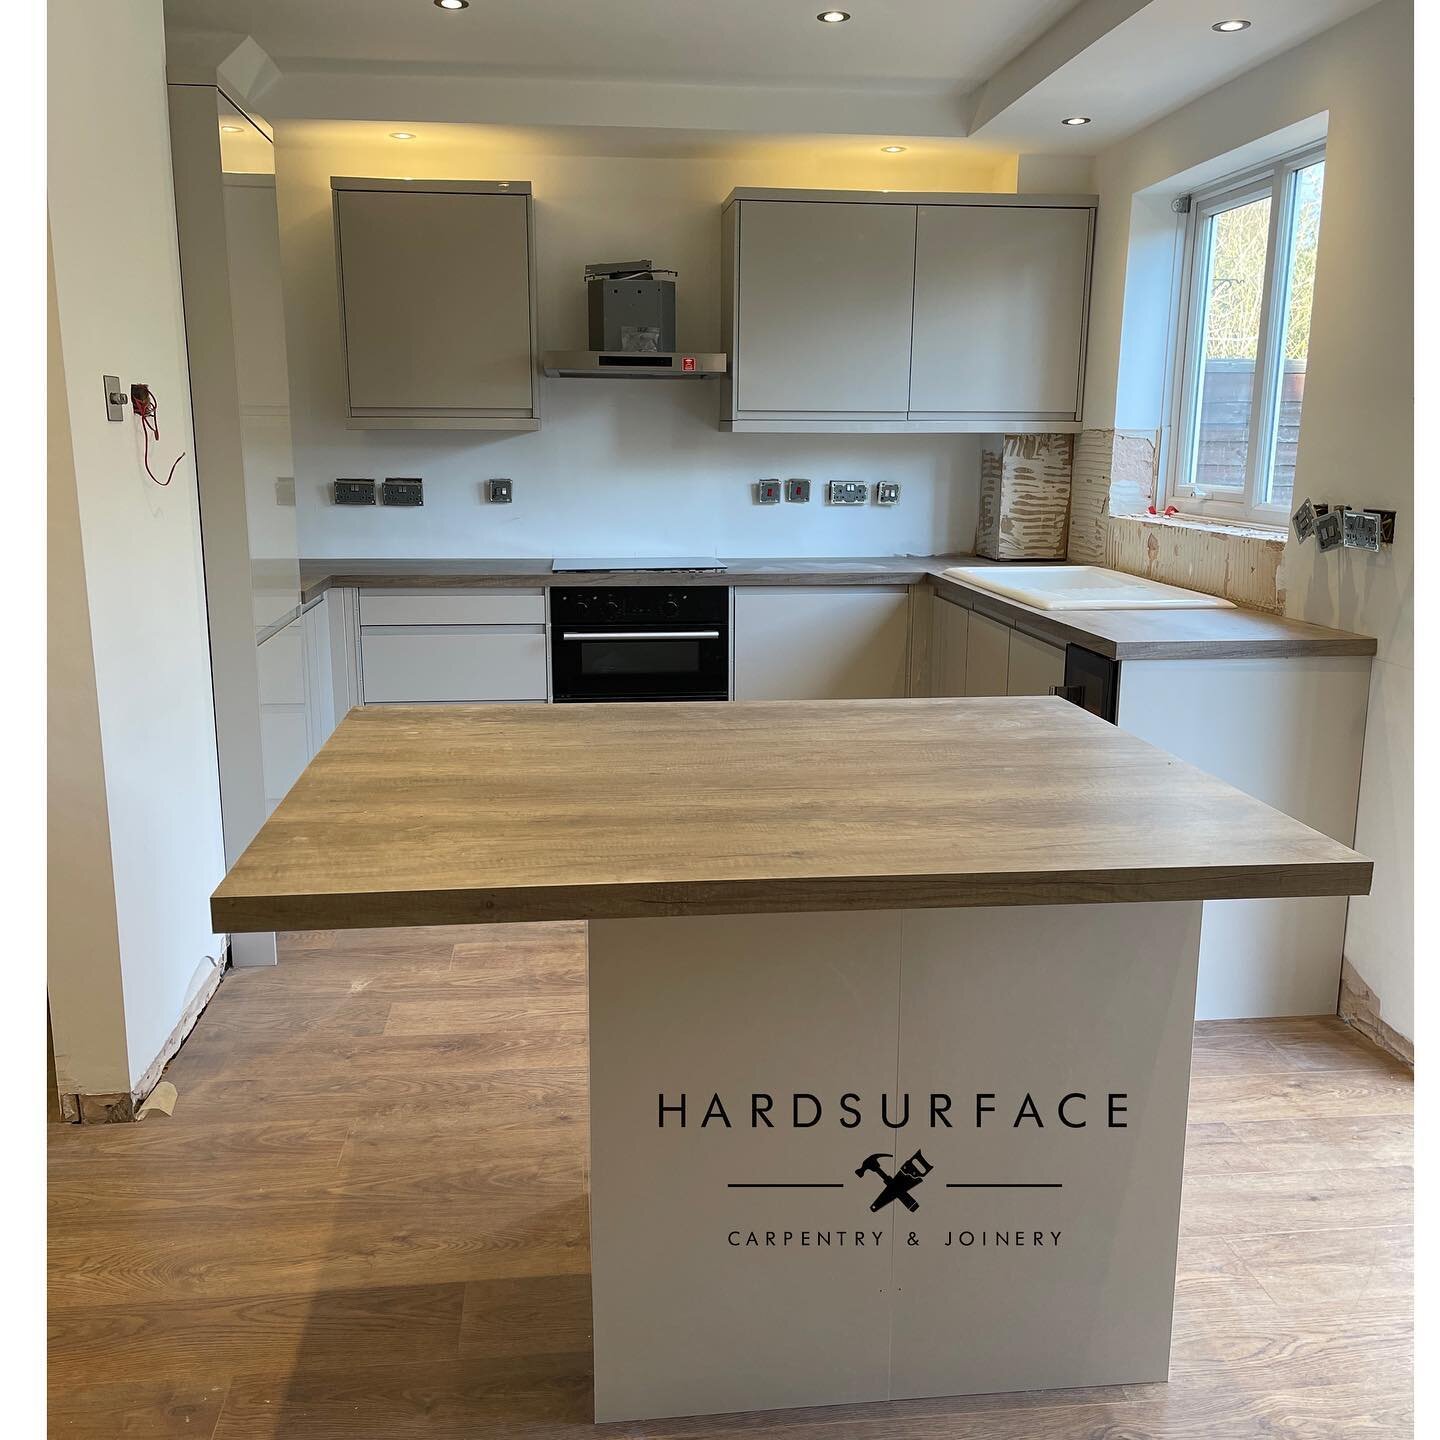 Thinking about a new kitchen? 
Change the lay out and make the most out of your space!
📞 07517842451
📧 michael@hardsurface.co.Uk